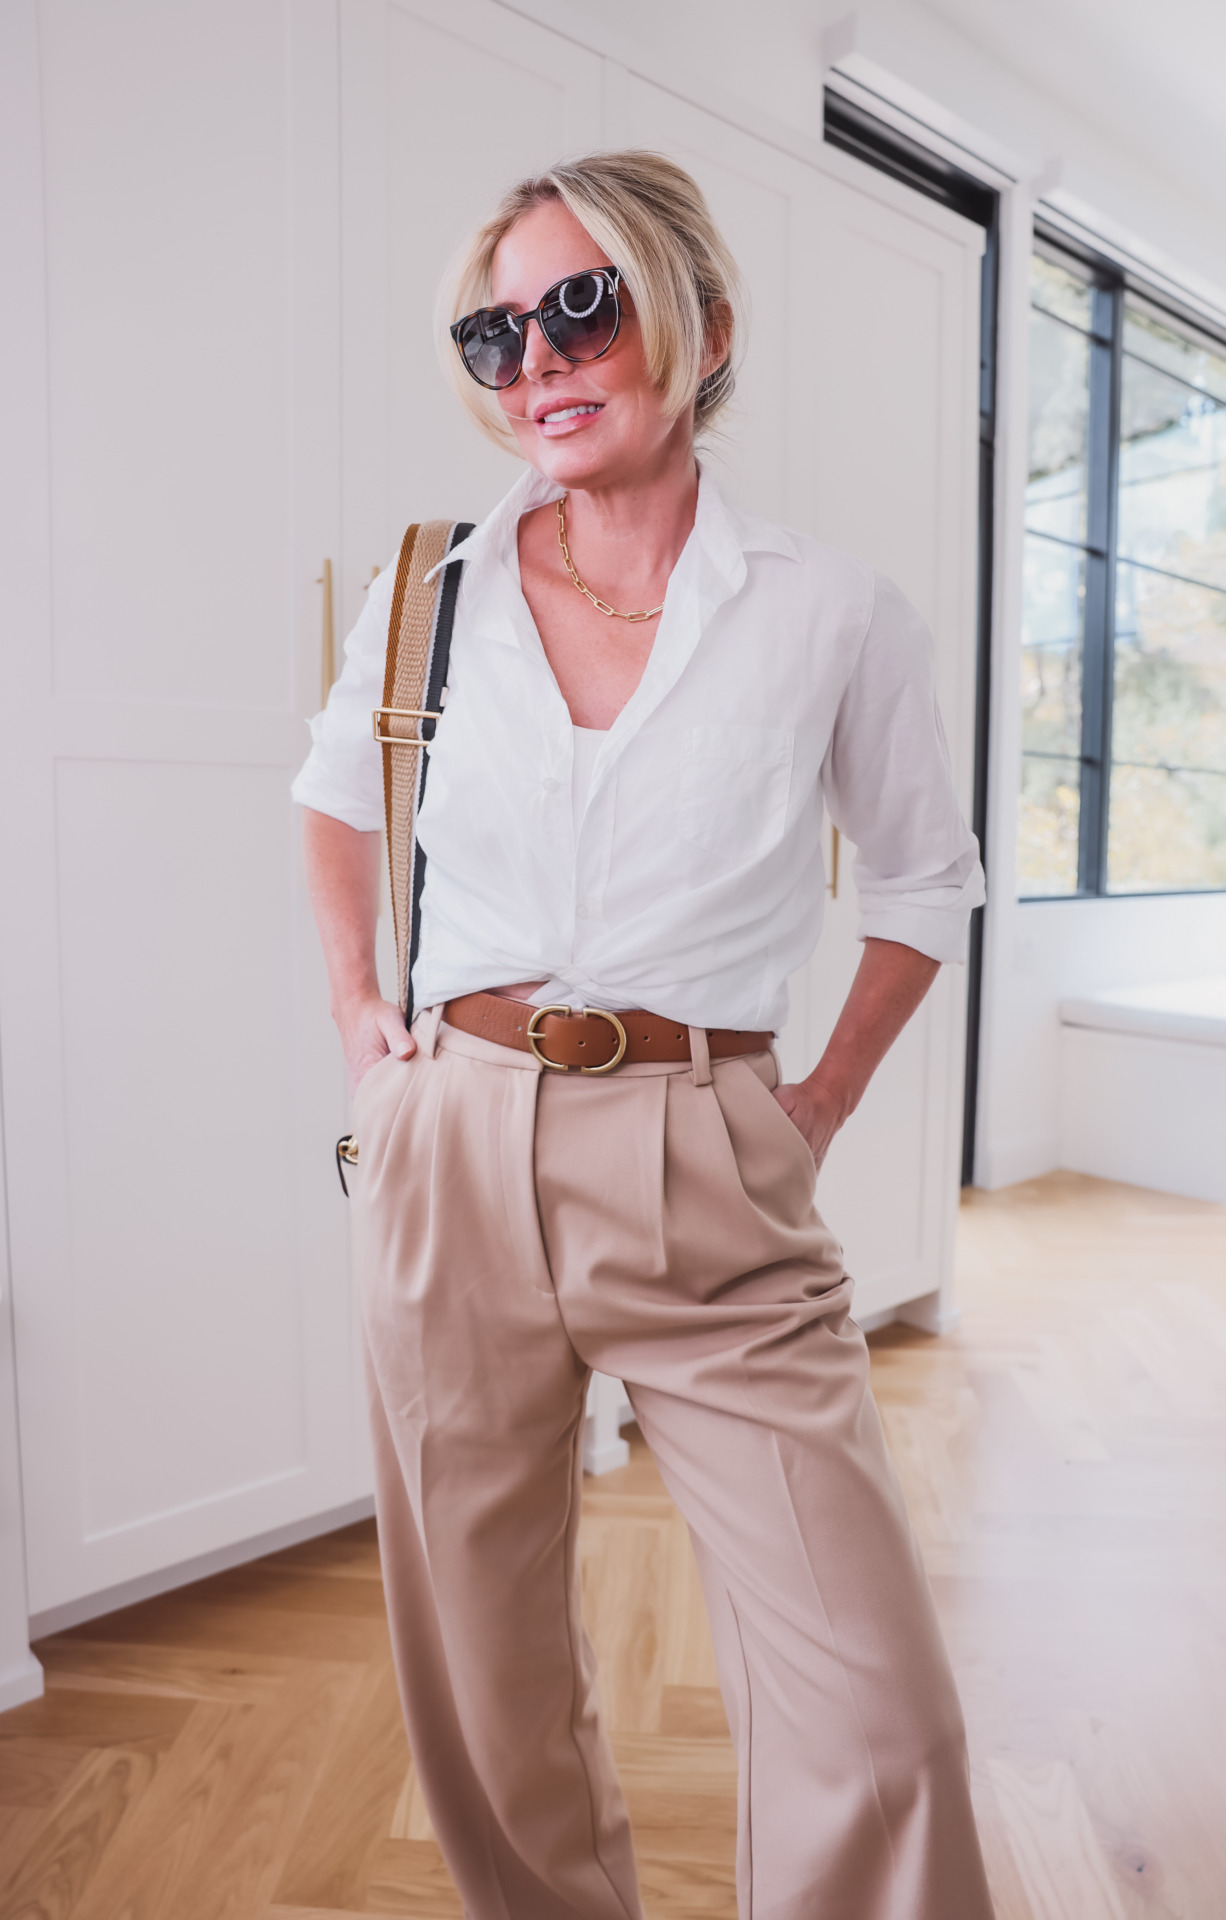 how to wear pleated pants, ways to wear pleated pants, ways to style pleated pants, how to style pleated pants, pleated trousers women, pleated pants over 40, favorite daughter pleated pants, pleated pants 2023, pleated pants outfits, erin busbee, busbee style, fashion over 40, eileen fisher white button down shirt, new balance 327 sneakers, le spec sunglasses, madewell belt, marc jacobs tri-color handbag